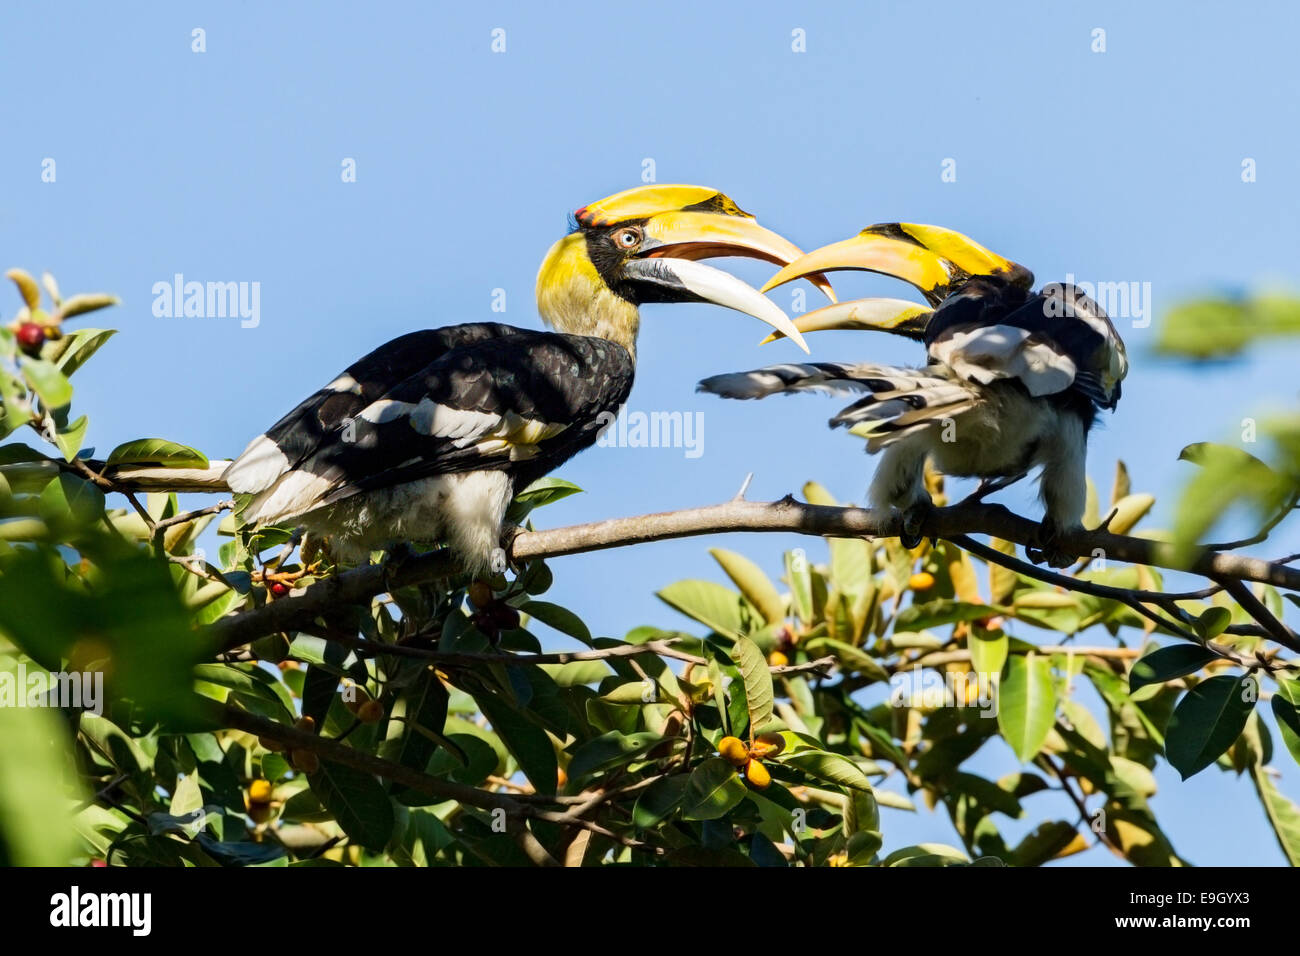 A breeding pair of Great hornbills (Buceros bicornis) courting in tropical rainforest canopy Stock Photo